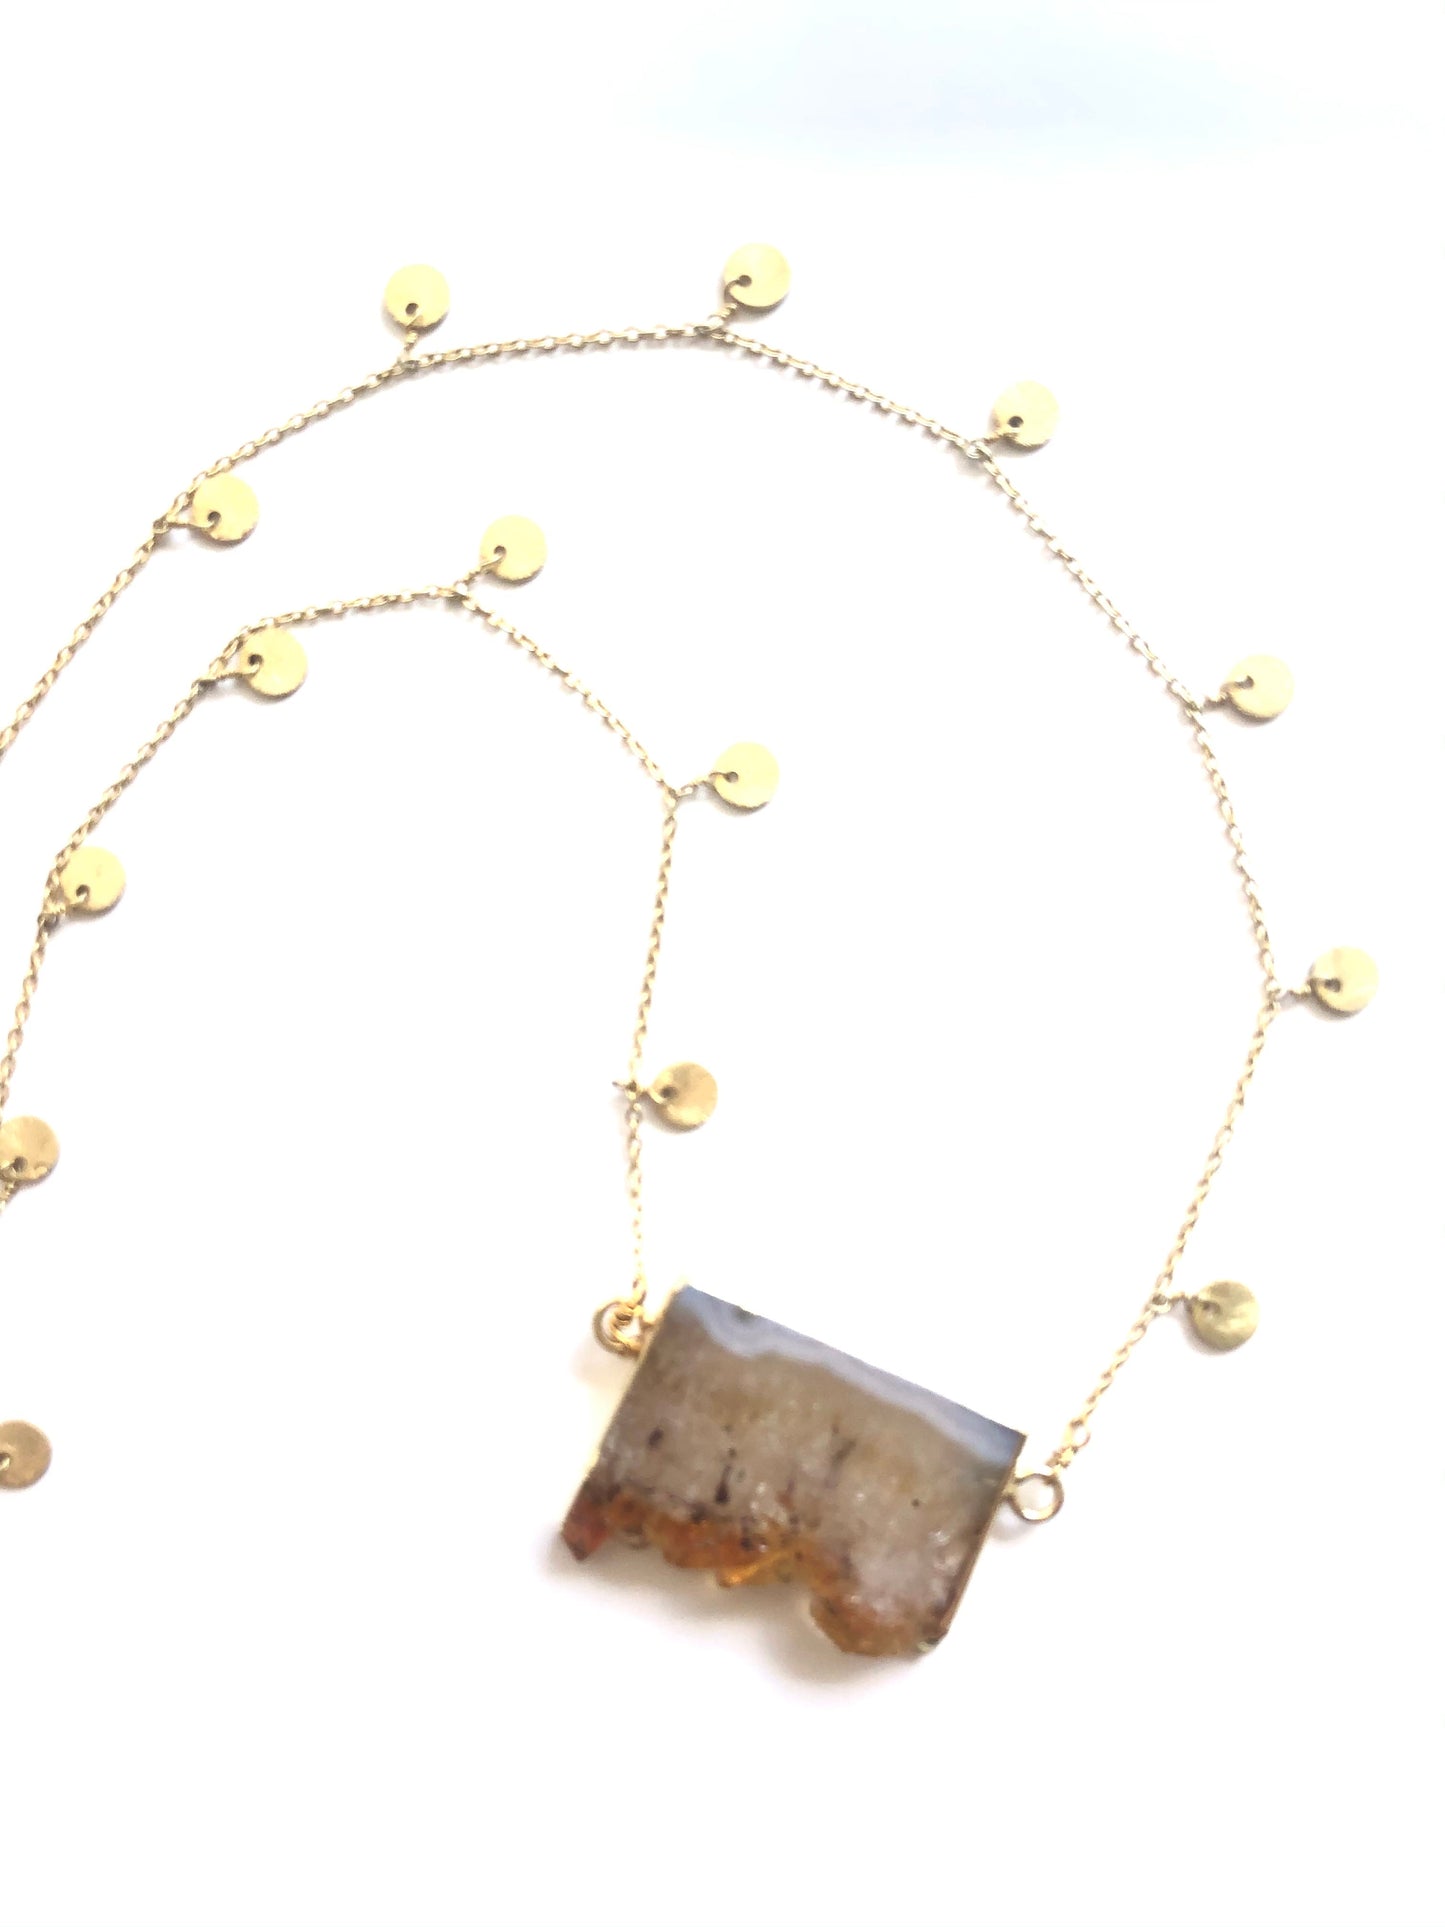 Citrine necklaces with gold chain